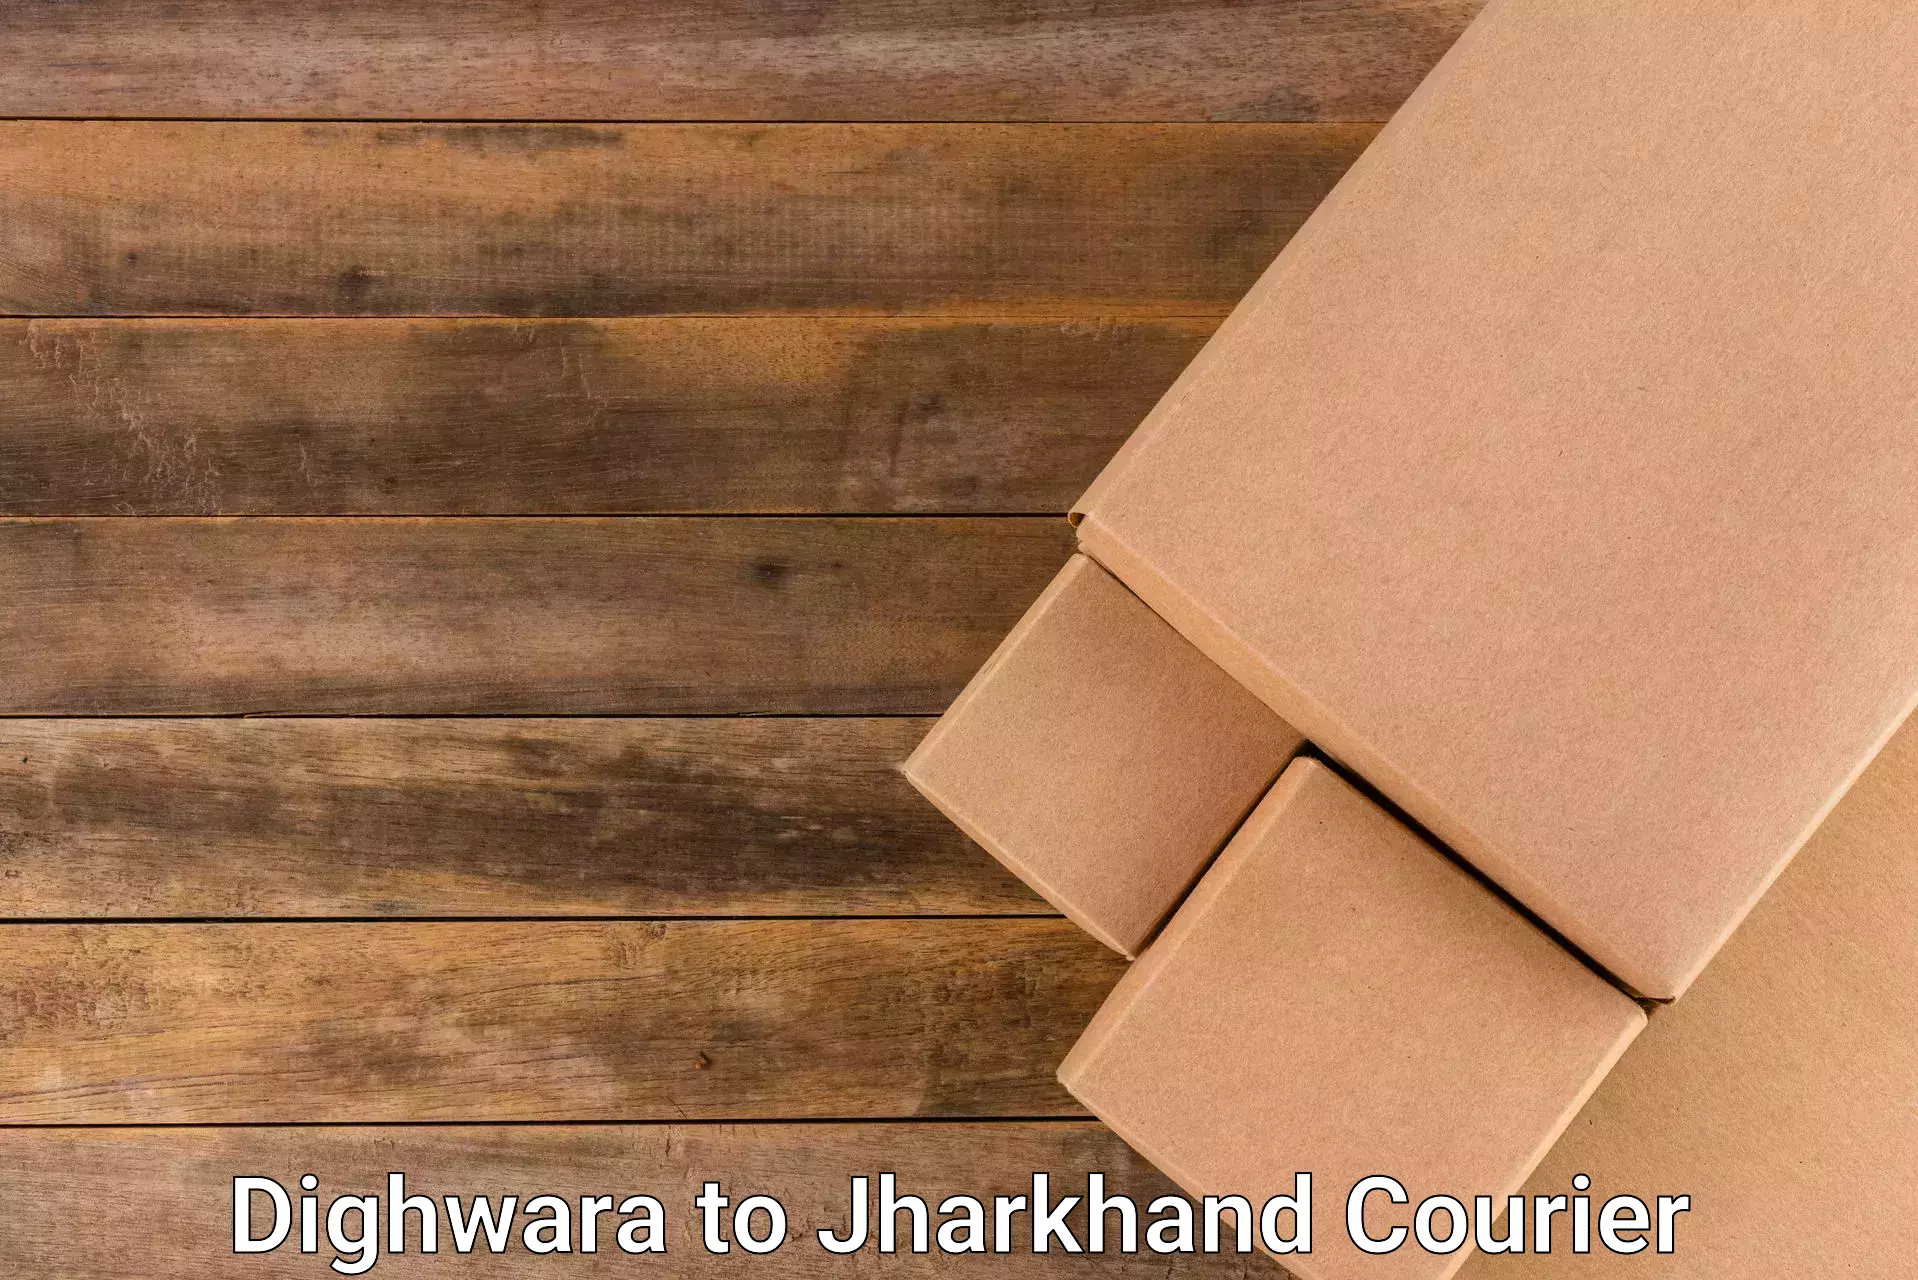 Next day courier Dighwara to Dhanbad